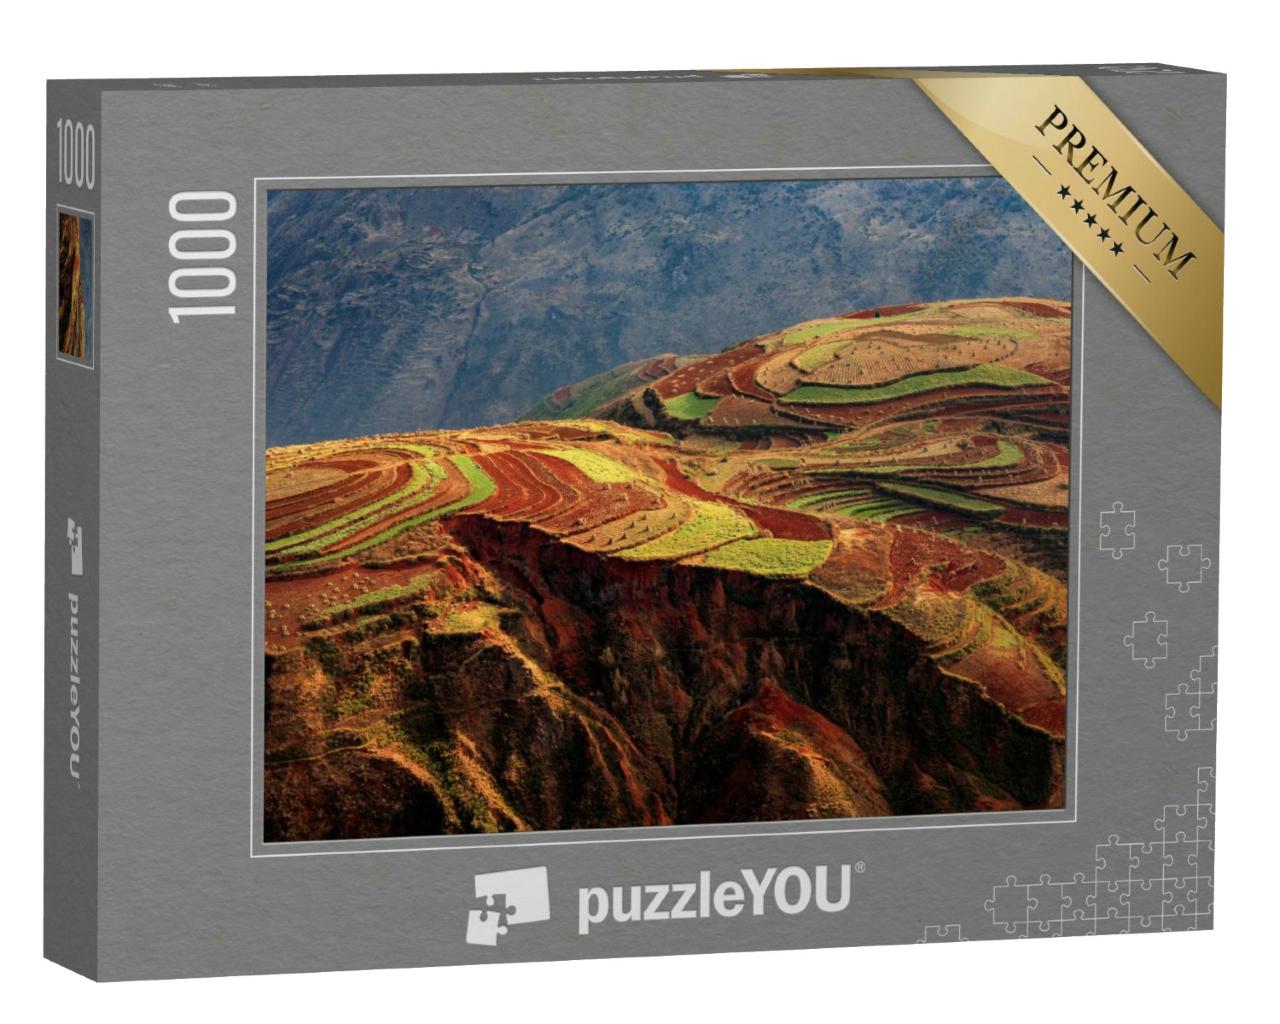 Puzzle 1000 Teile „Rote Erde von Dongchuan, Yunnan, China“